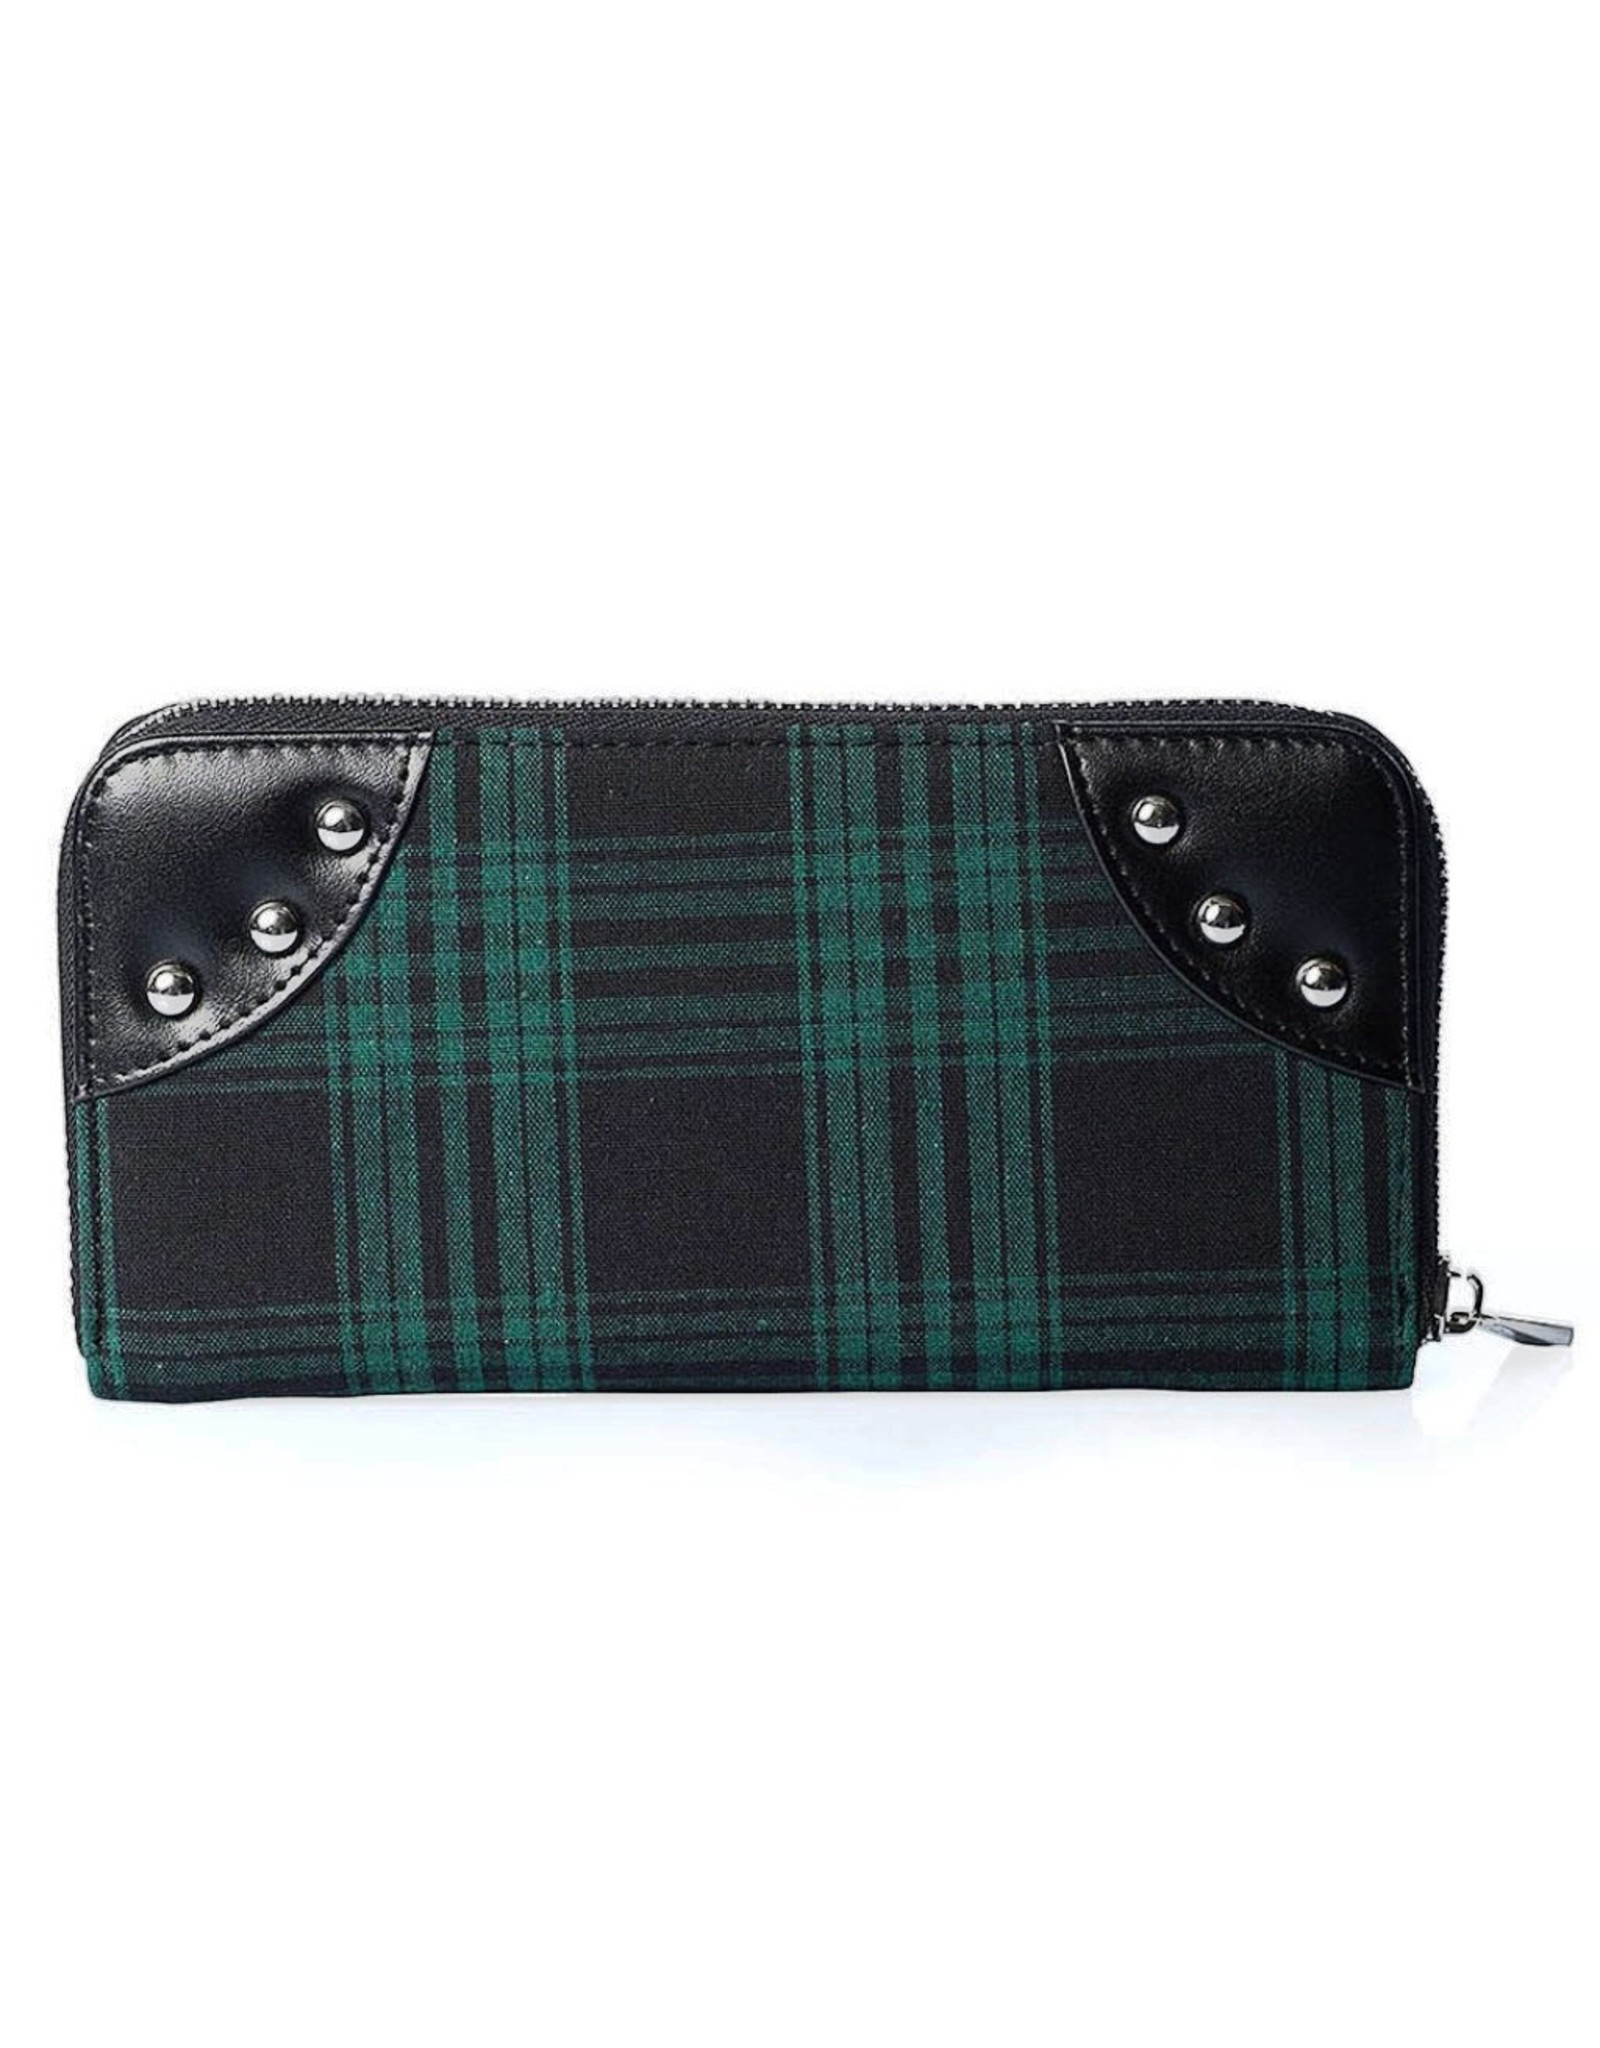 Banned Gothic wallets and Purses - Tartan Wallet with Handcuffs (green)